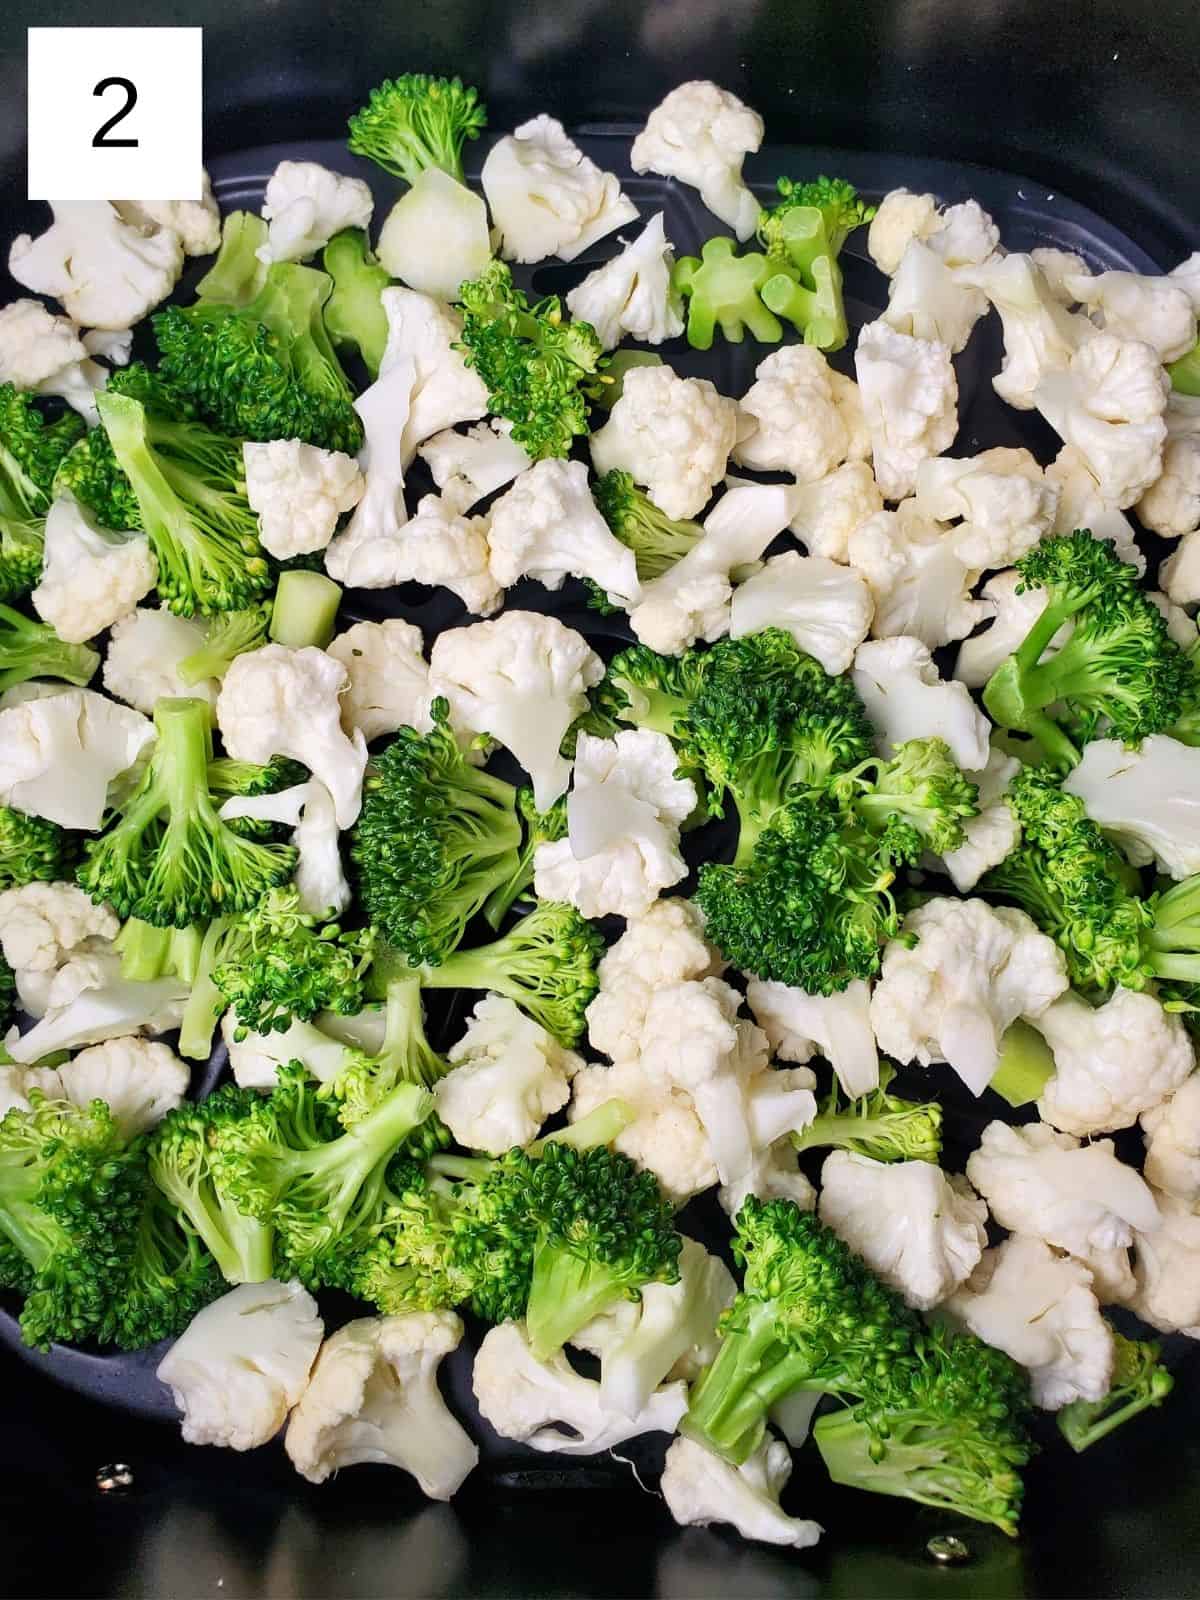 fresh broccoli and cauliflower, chopped into small pieces, in an air fryer.